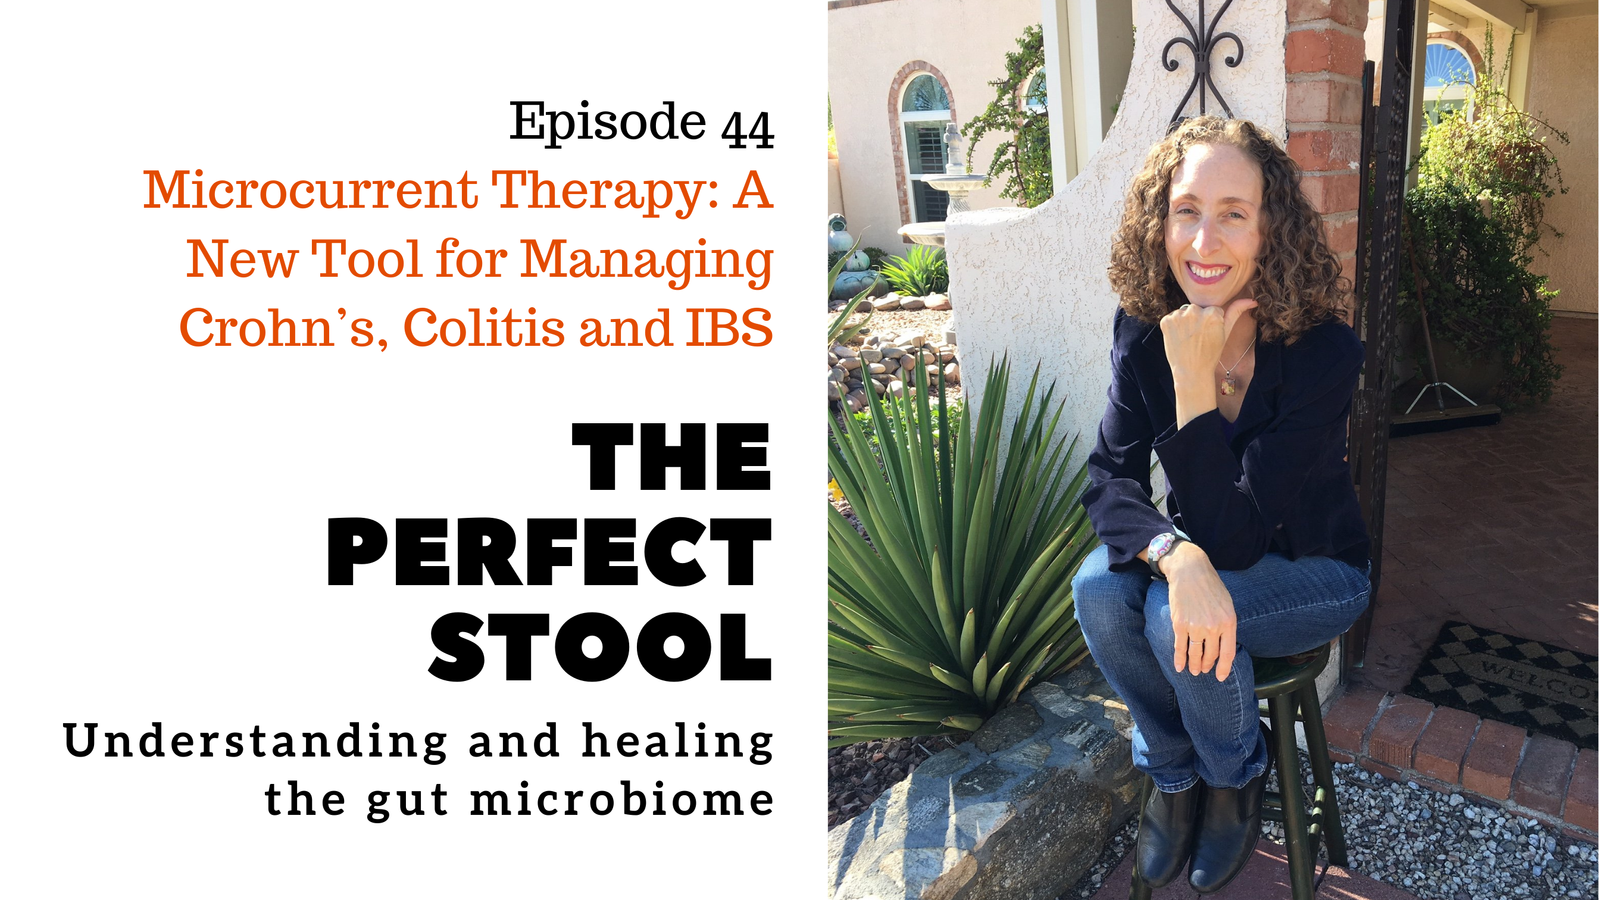 Episode 44: Microcurrent Therapy: A New Tool for Managing Crohn’s, Colitis and IBS